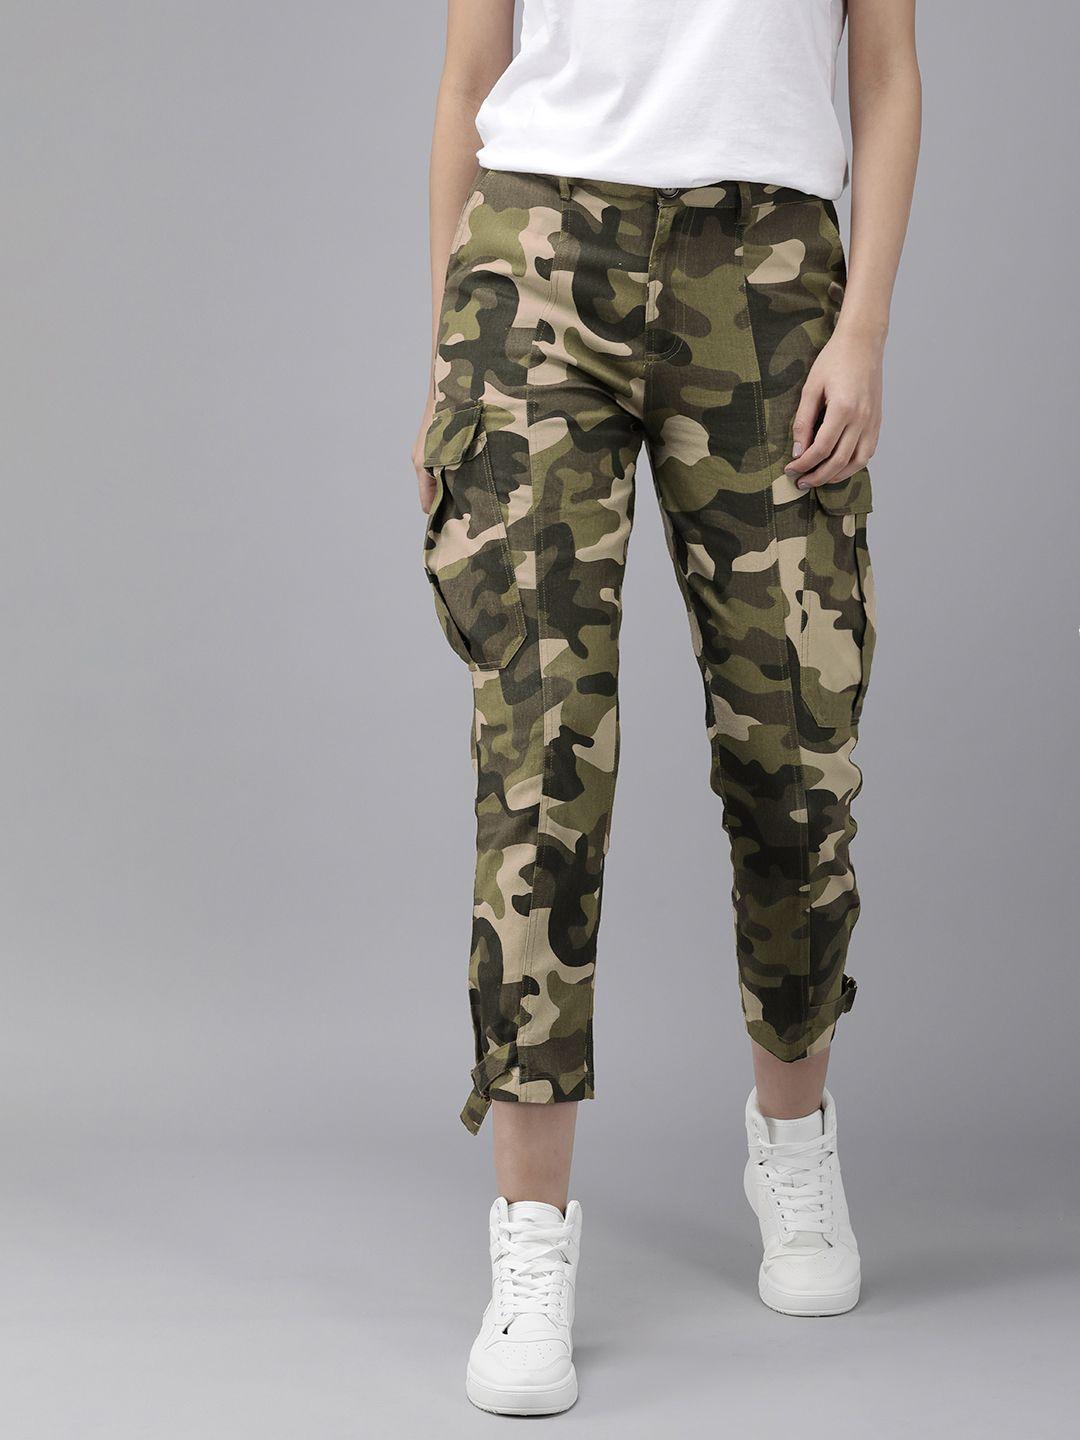 the-roadster-life-co.-women-pure-cotton-camouflage-printed-cargos